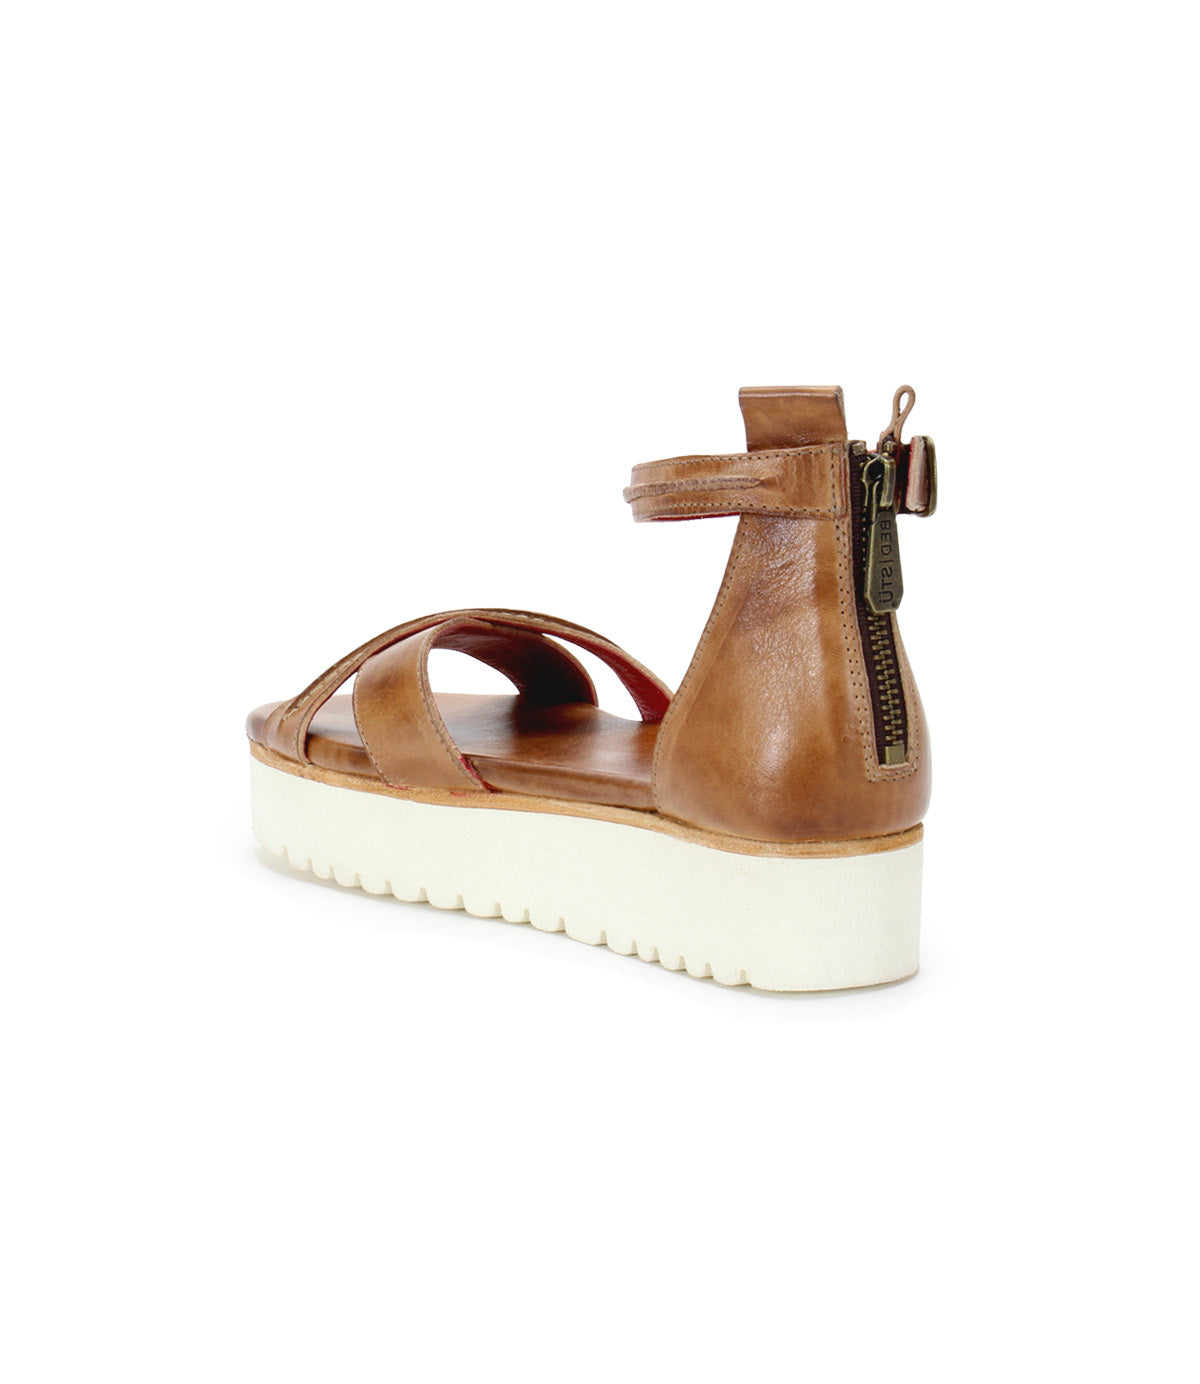 A pair of Carroll leather sandals by Bed Stu with a white sole.